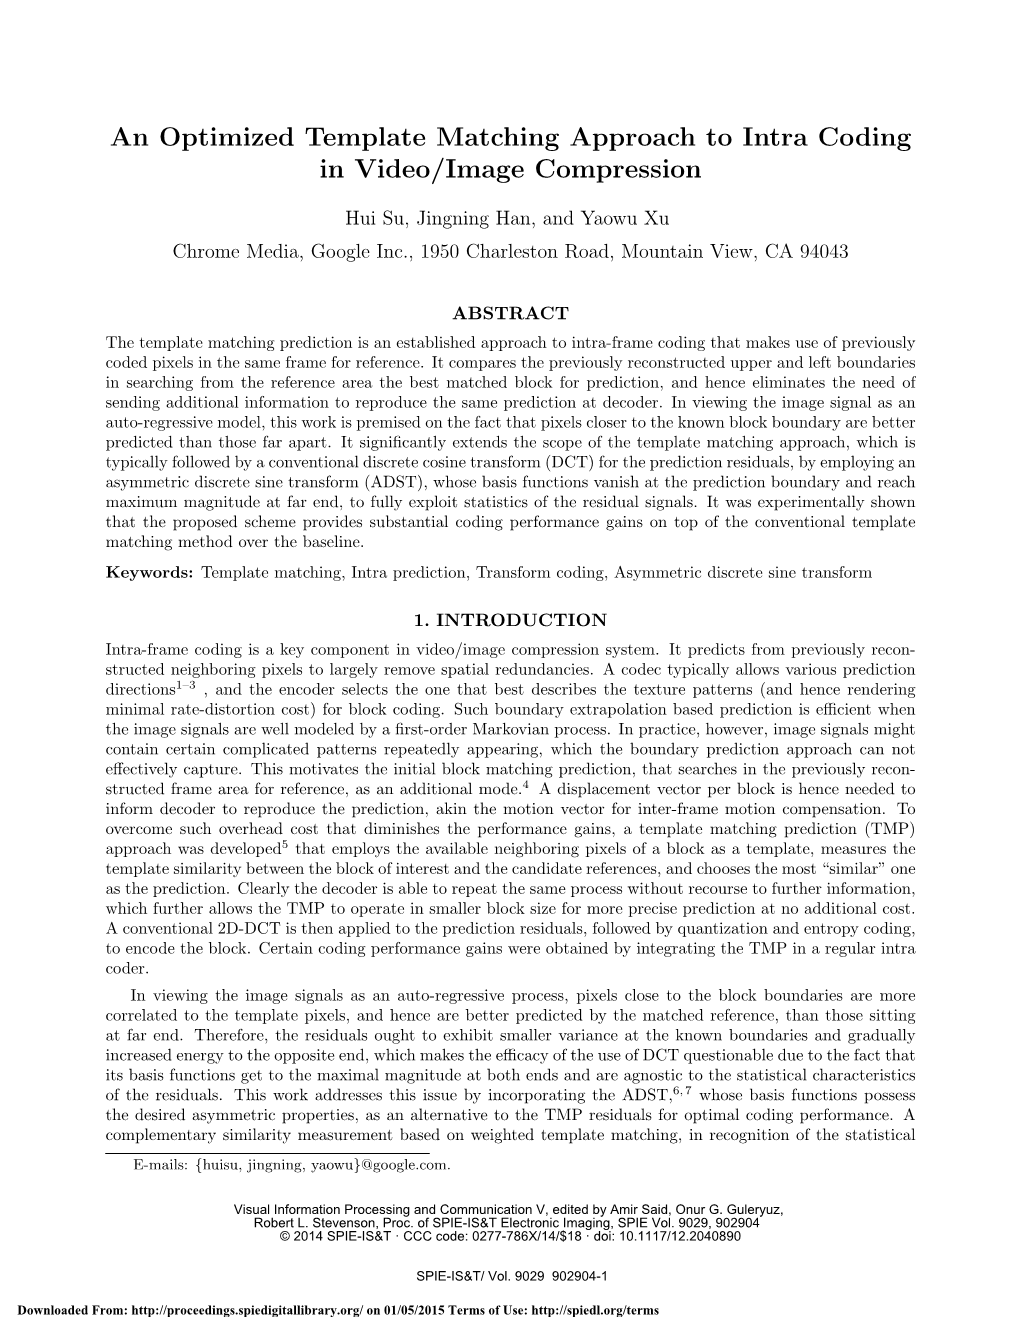 An Optimized Template Matching Approach to Intra Coding in Video/Image Compression